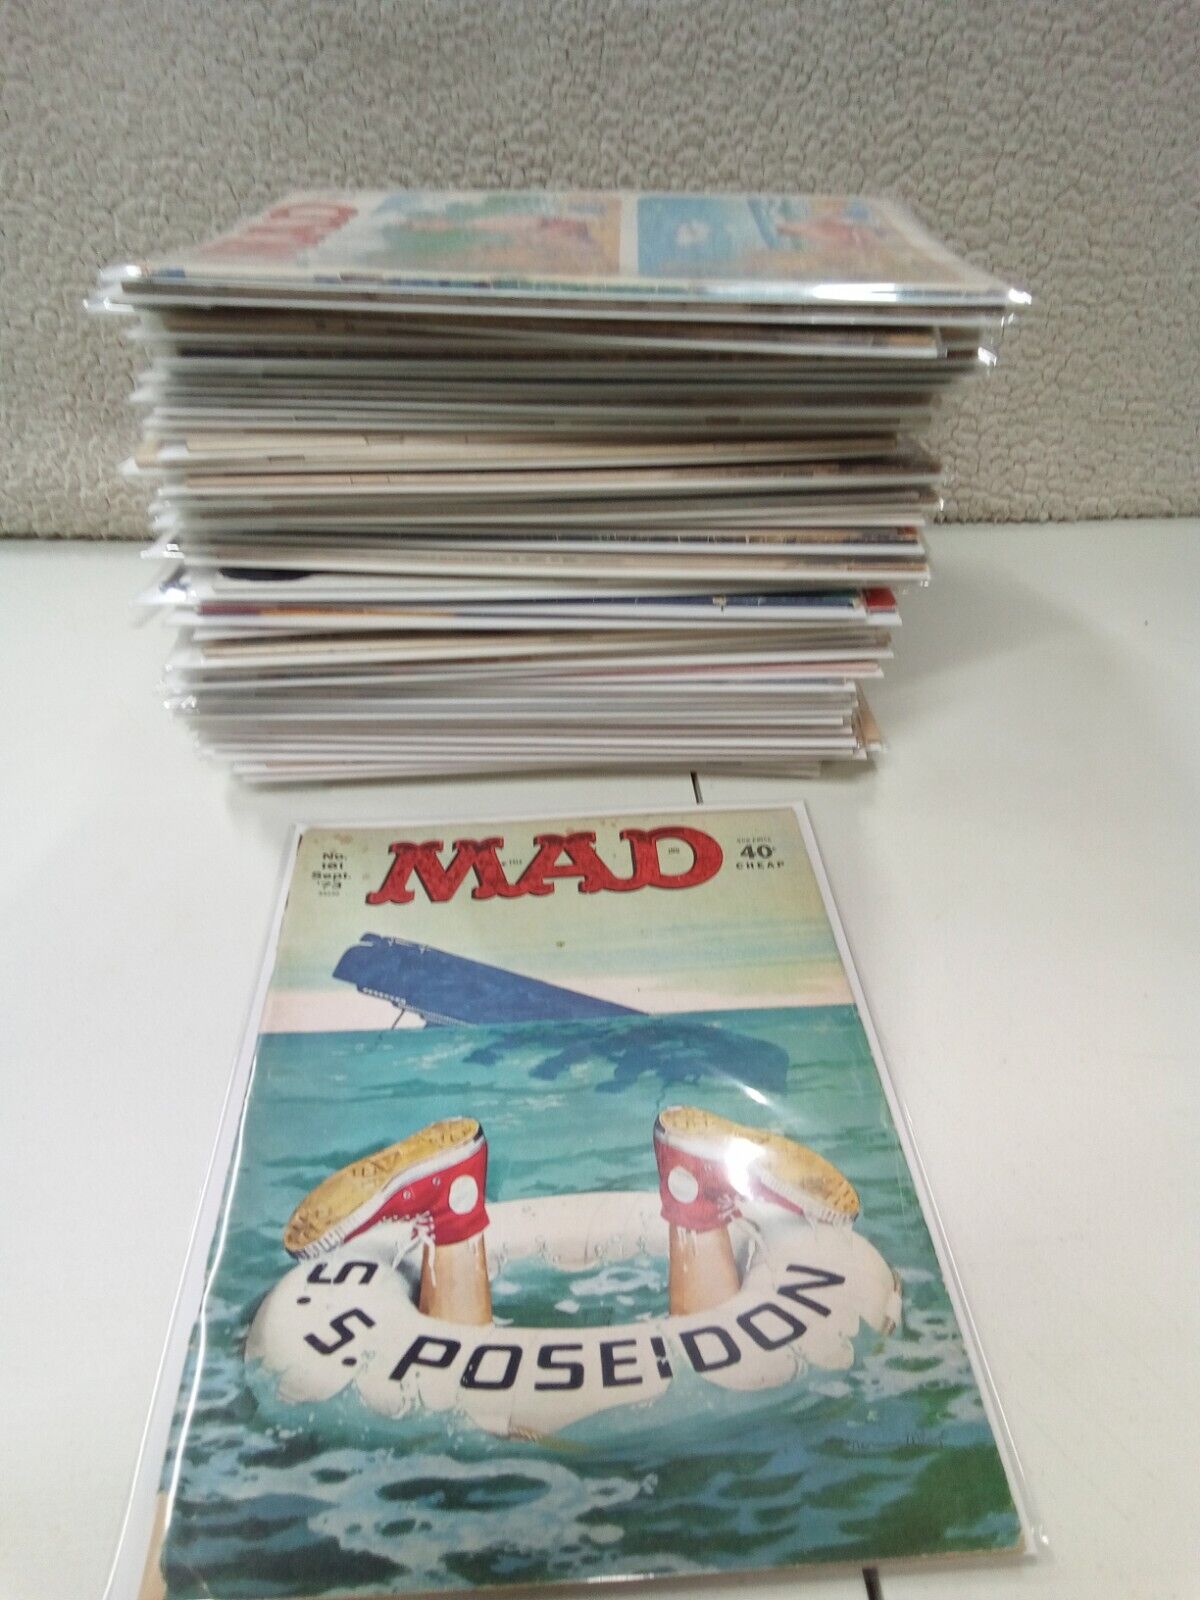 Huge Lot Of 56 Vintage Mad Magazines Ranging From 1960\'s To The 1990\'s